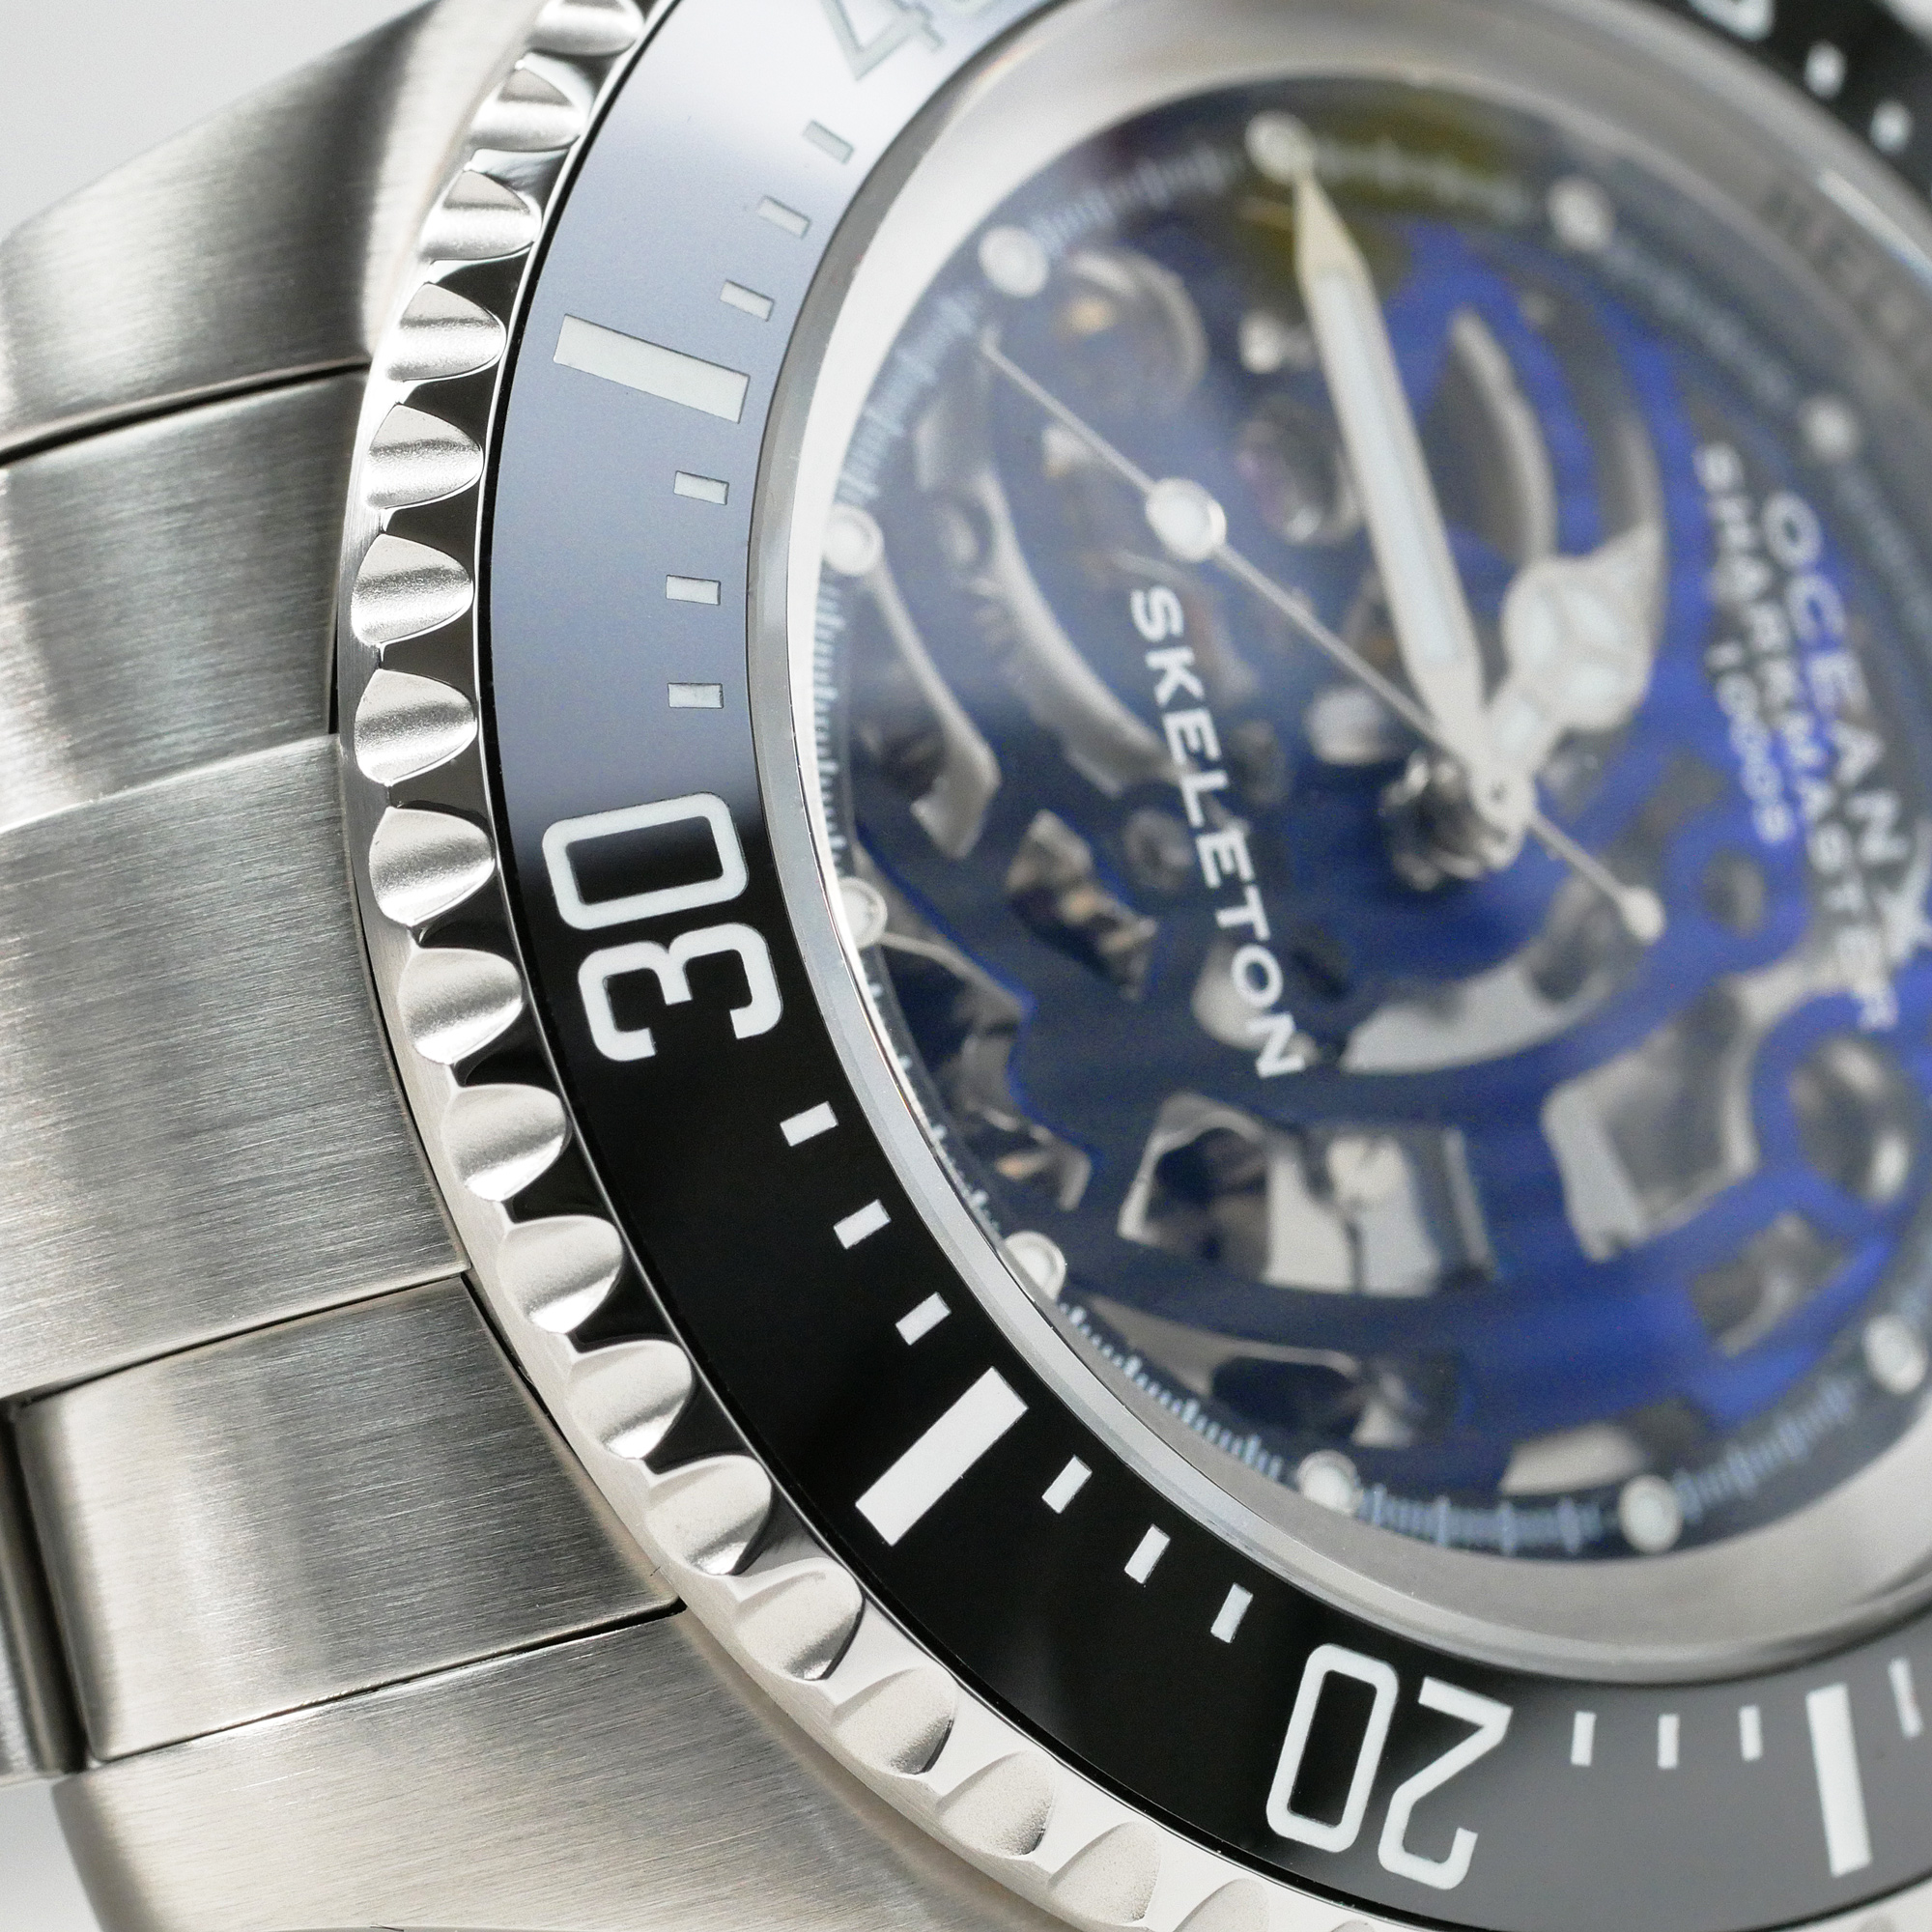 OceanX Sharkmaster 1000 Skeleton 44mm Automatic Men's Diver Watch WR1000m SMS1012S Limited Edition